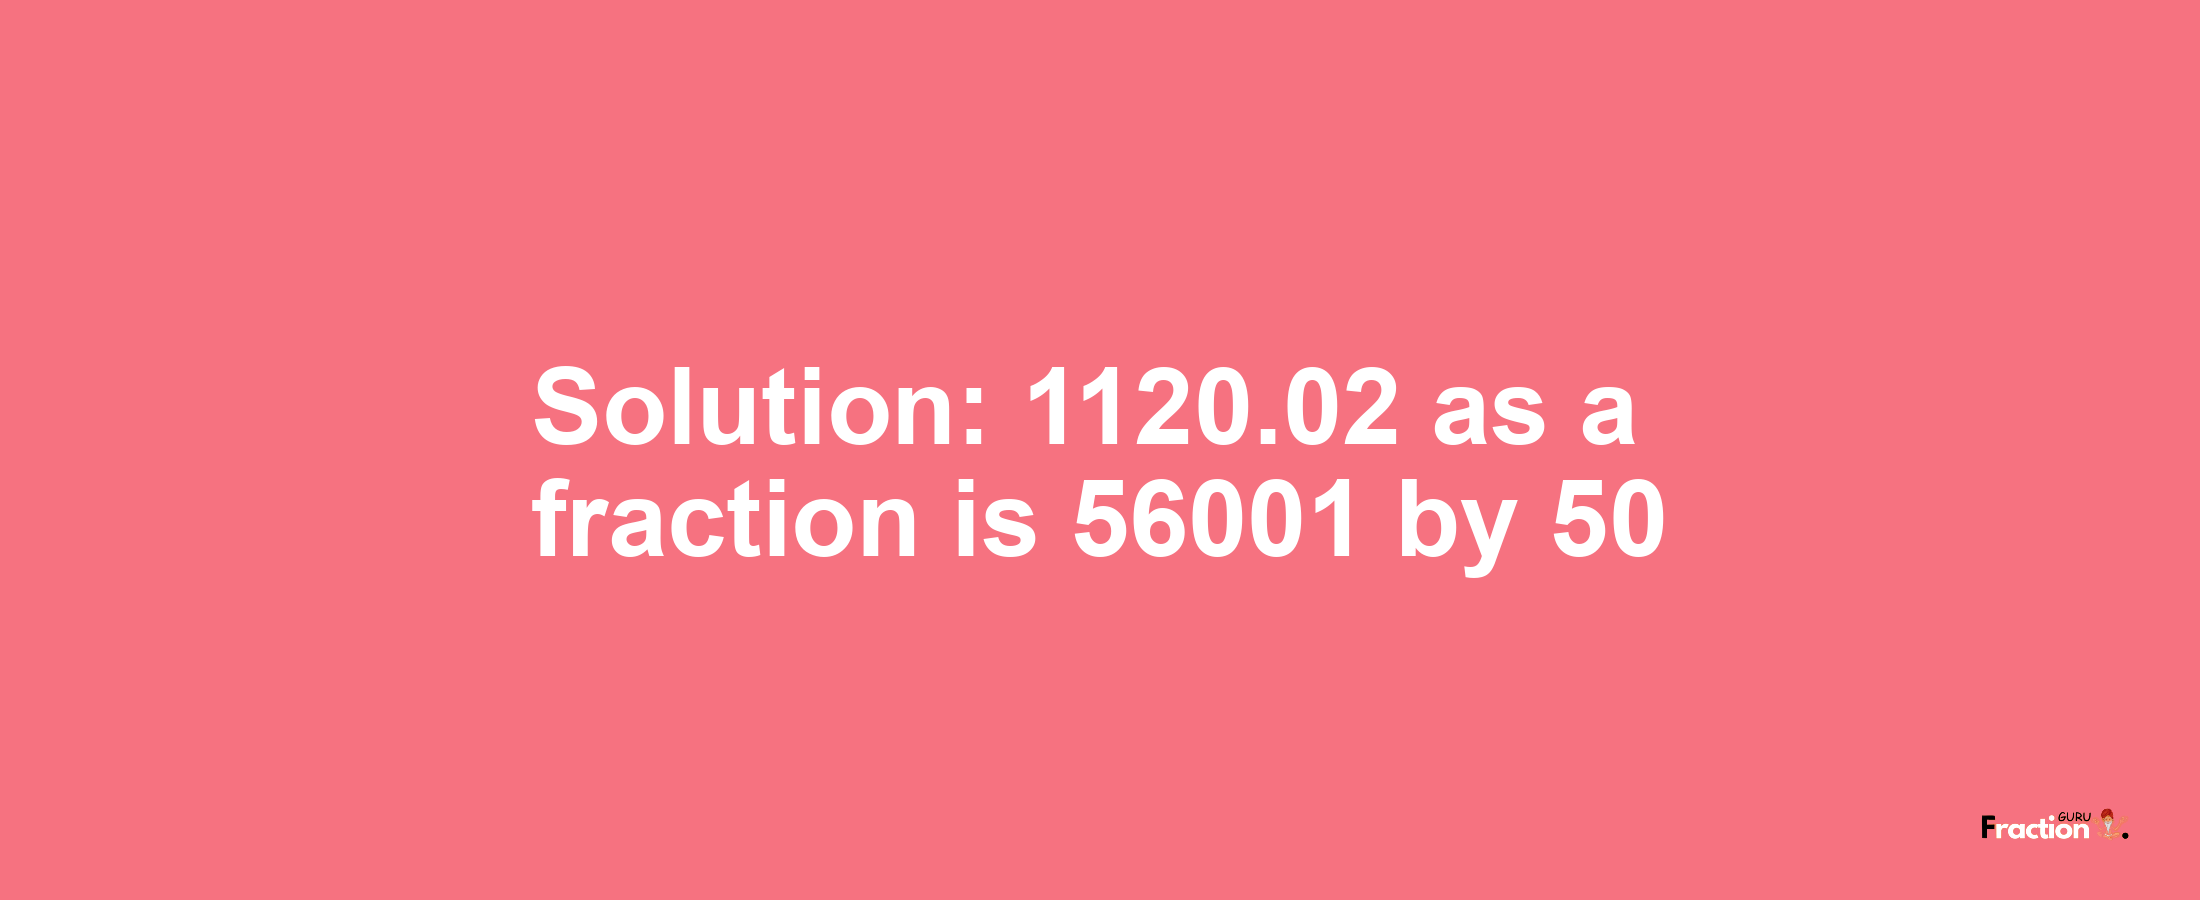 Solution:1120.02 as a fraction is 56001/50